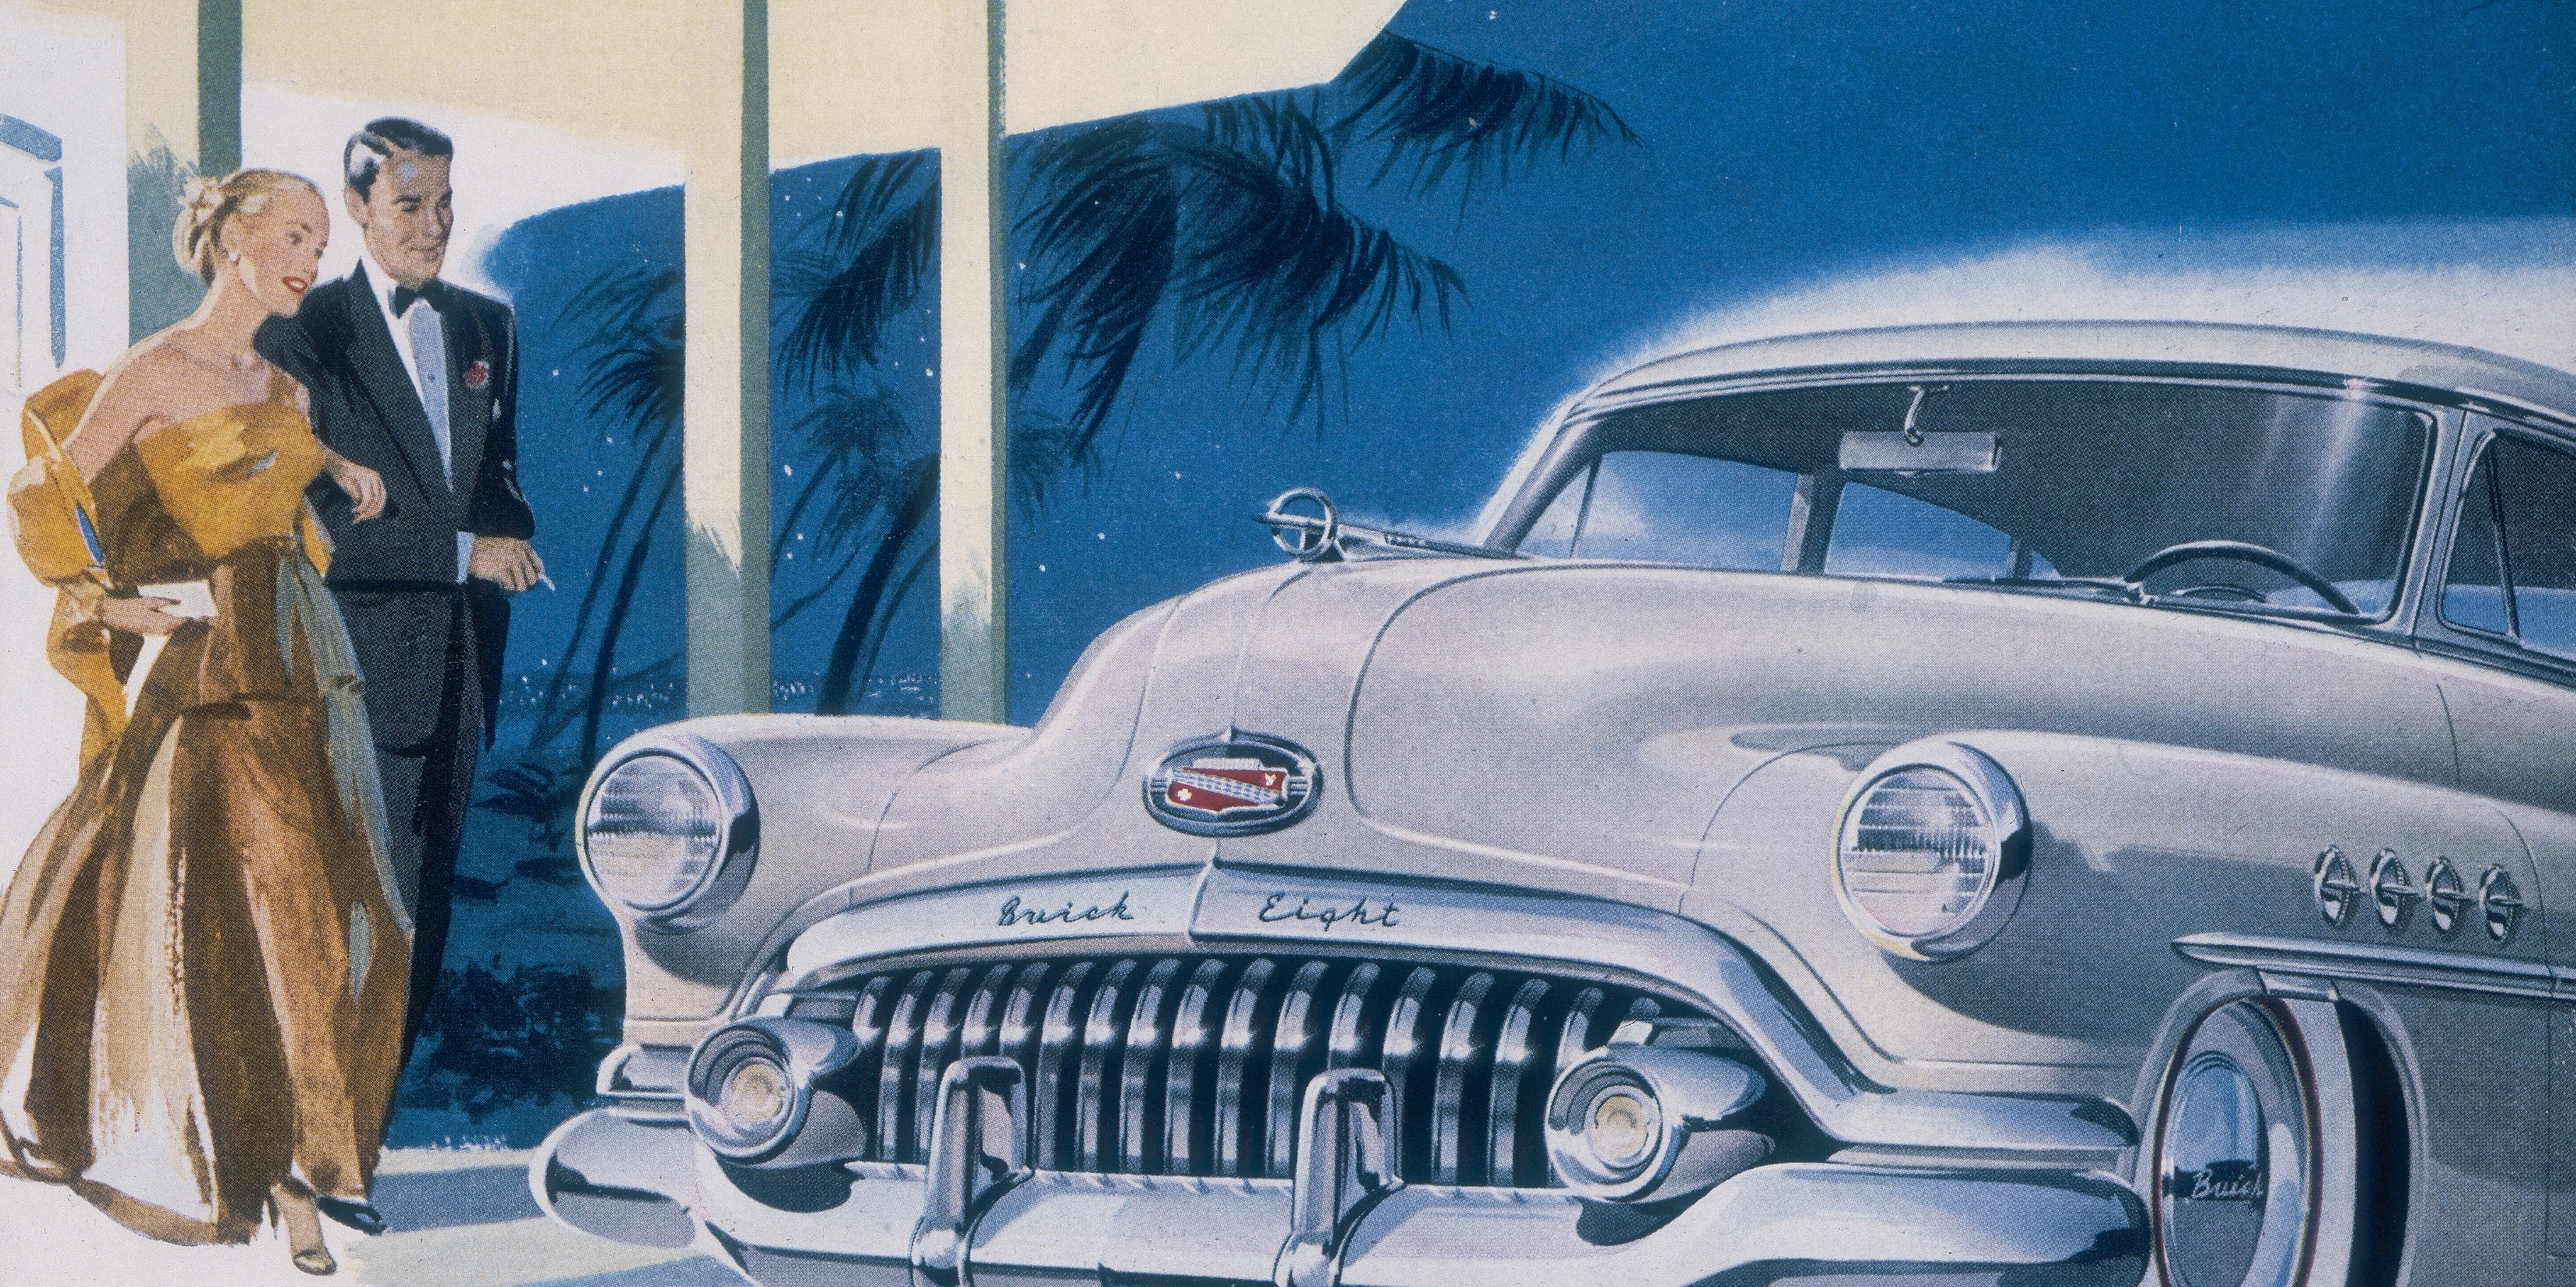 Poster advertising a Buick, 1952.